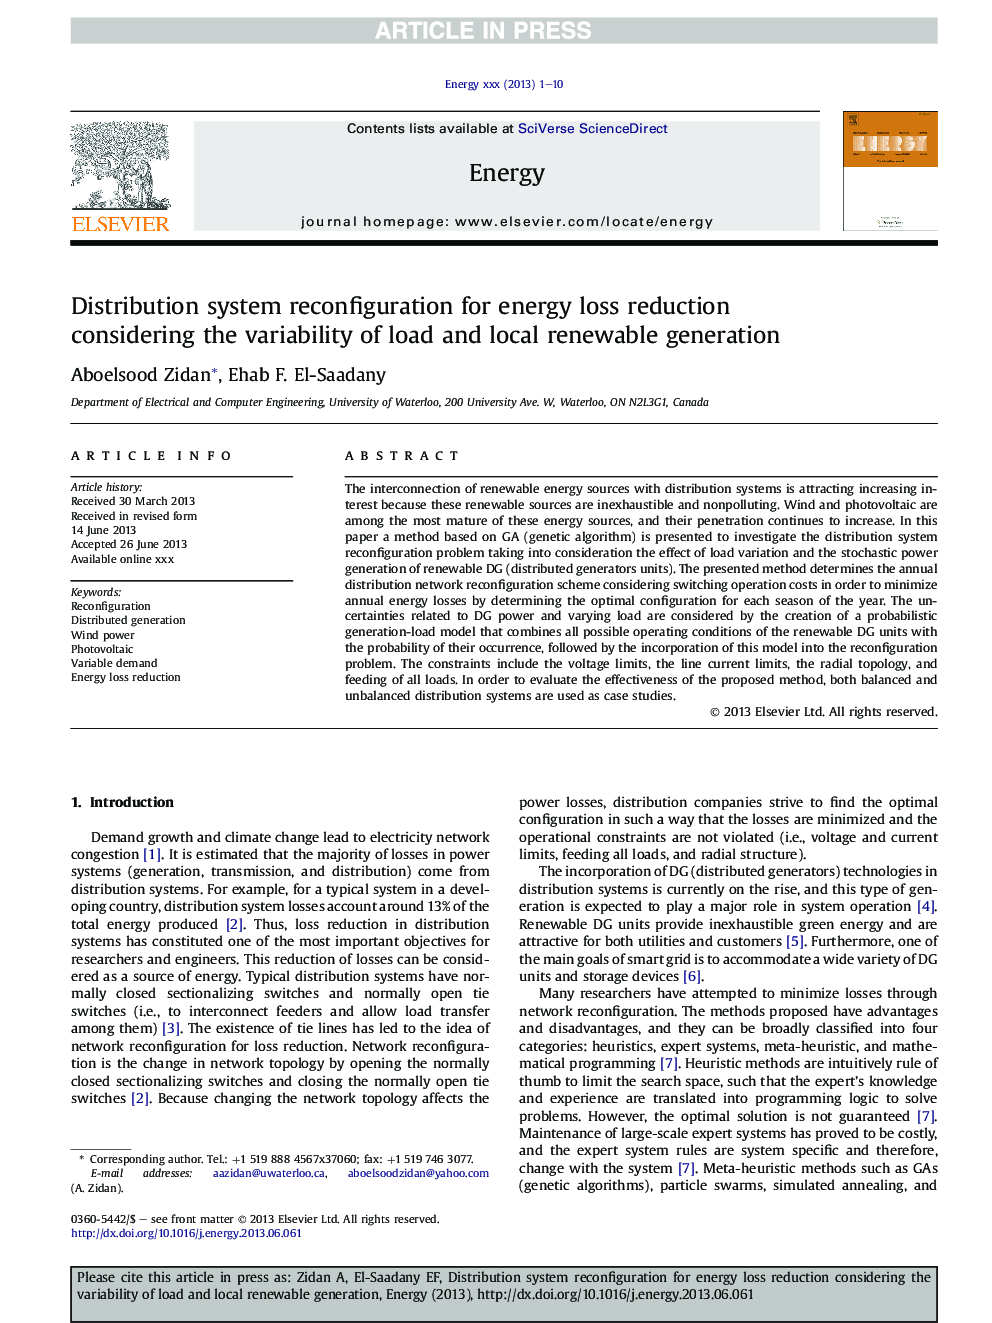 Distribution system reconfiguration for energy loss reduction considering the variability of load and local renewable generation